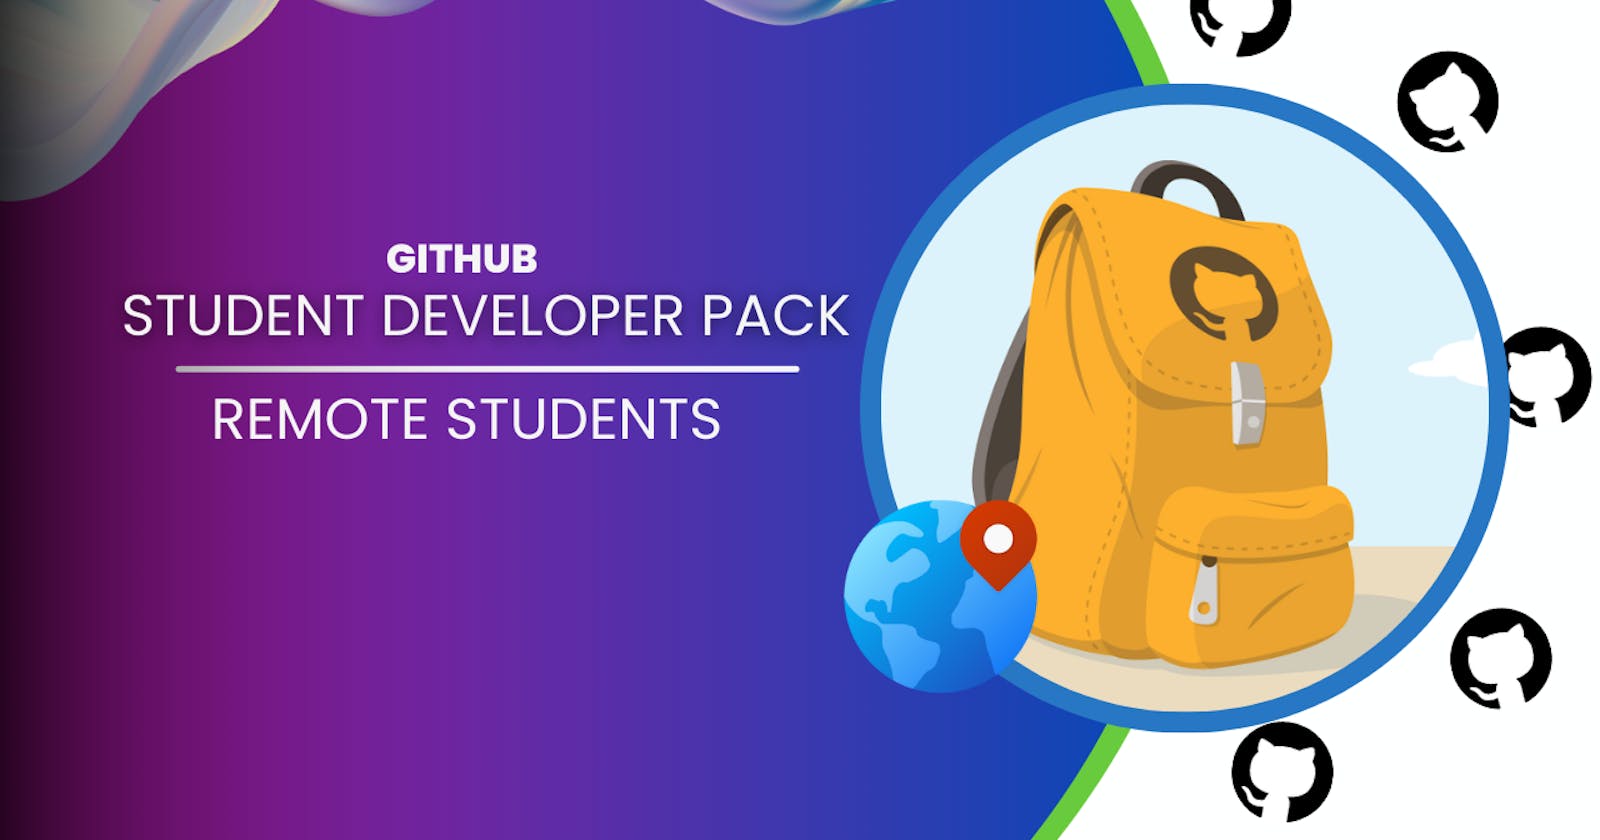 Ultimate Guide: How to Get the GitHub Student Developer Pack for Free as a Remote Student